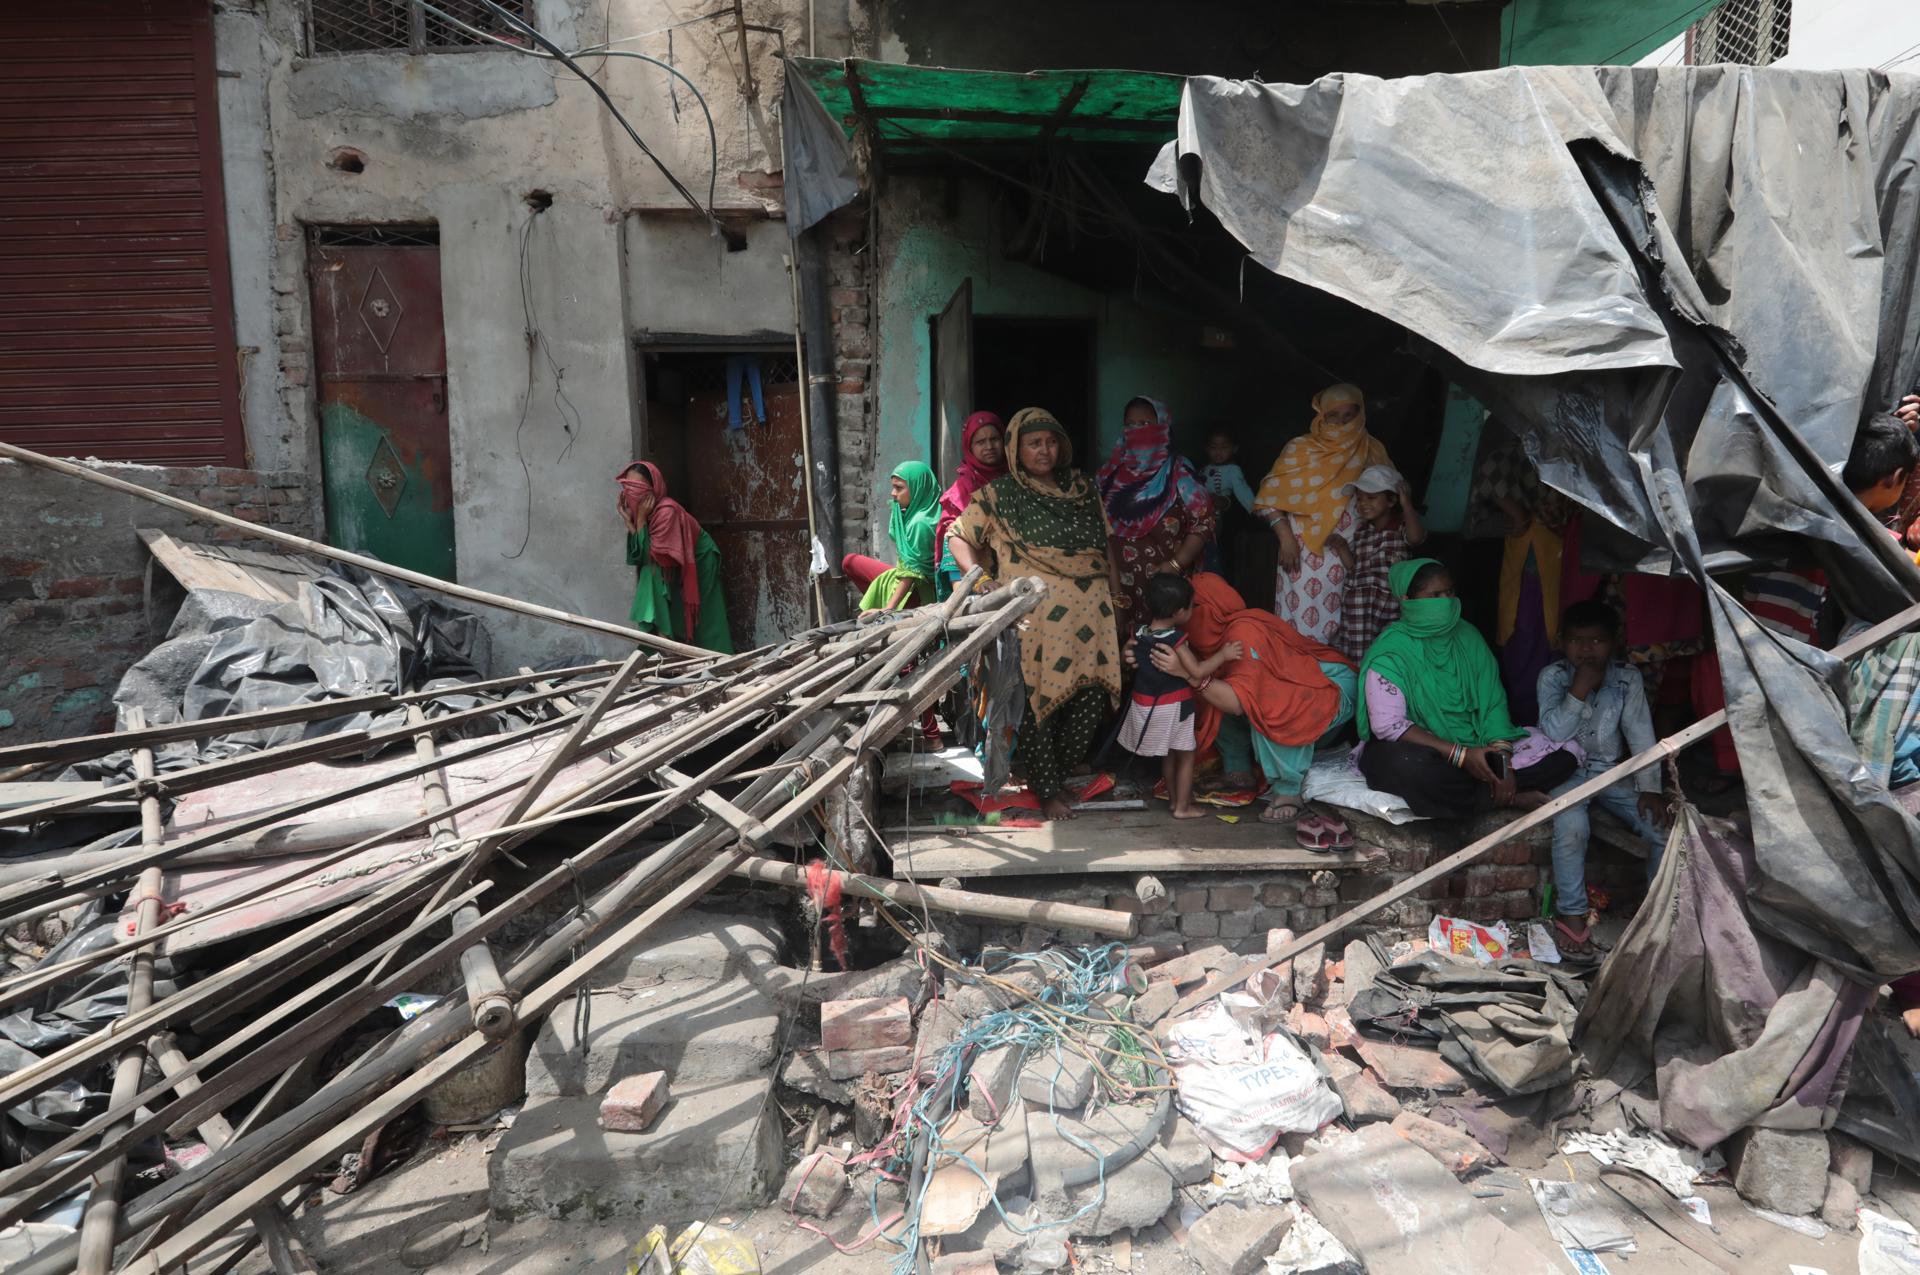 Local residents near dismantled structures during the demolition drive of illegal structures in Delhi's violence-hit Jahangirpuri in New Delhi, India 20 April 2022. EFE-EPA FILE/RAJAT GUPTA
